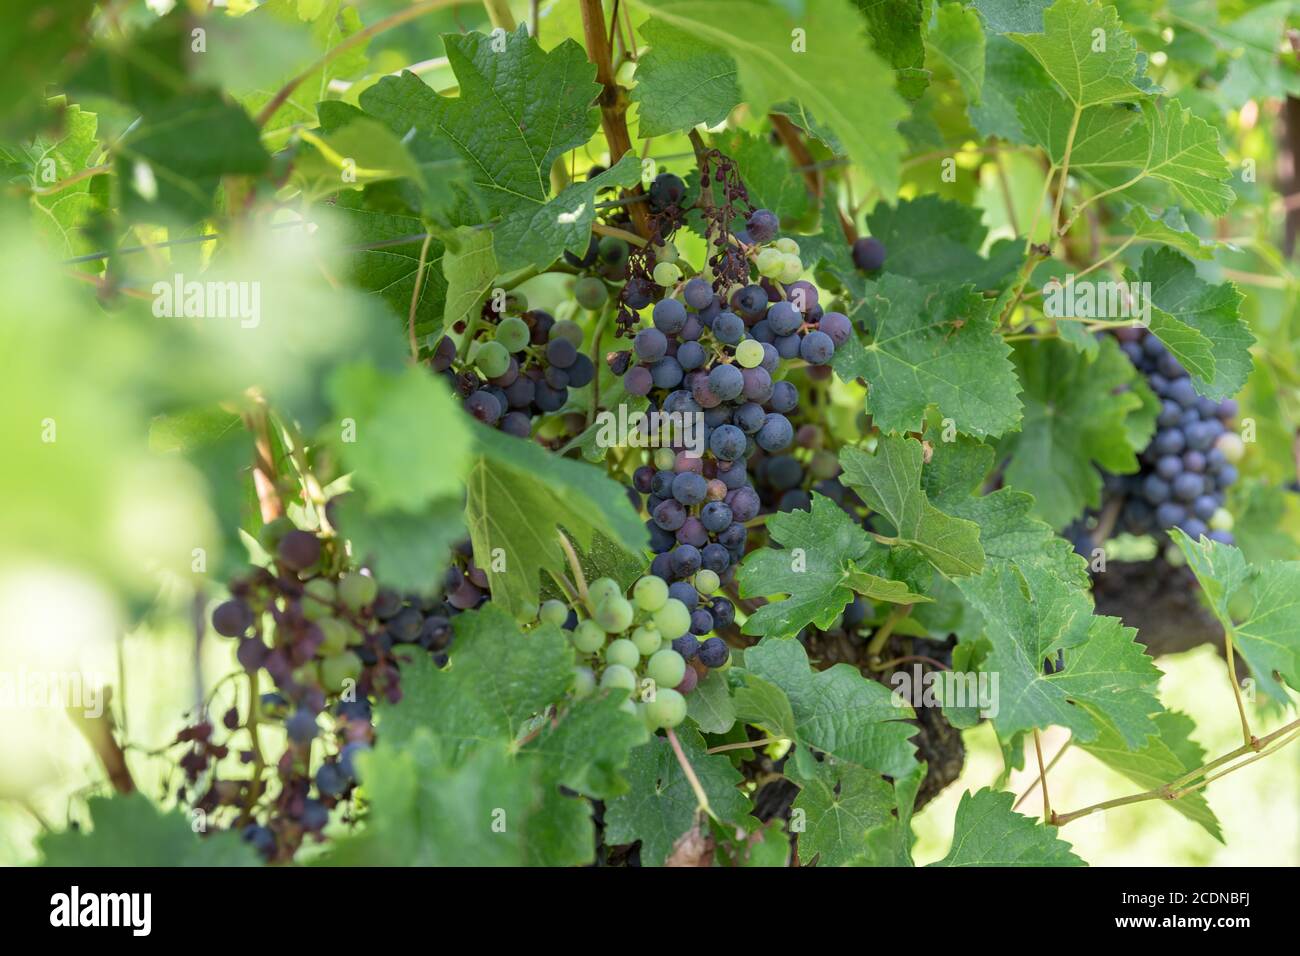 Grape variety. Blue grape and green grape leaf background in Italy. New vintage wine background. Close-up with shallow DOF. Stock Photo